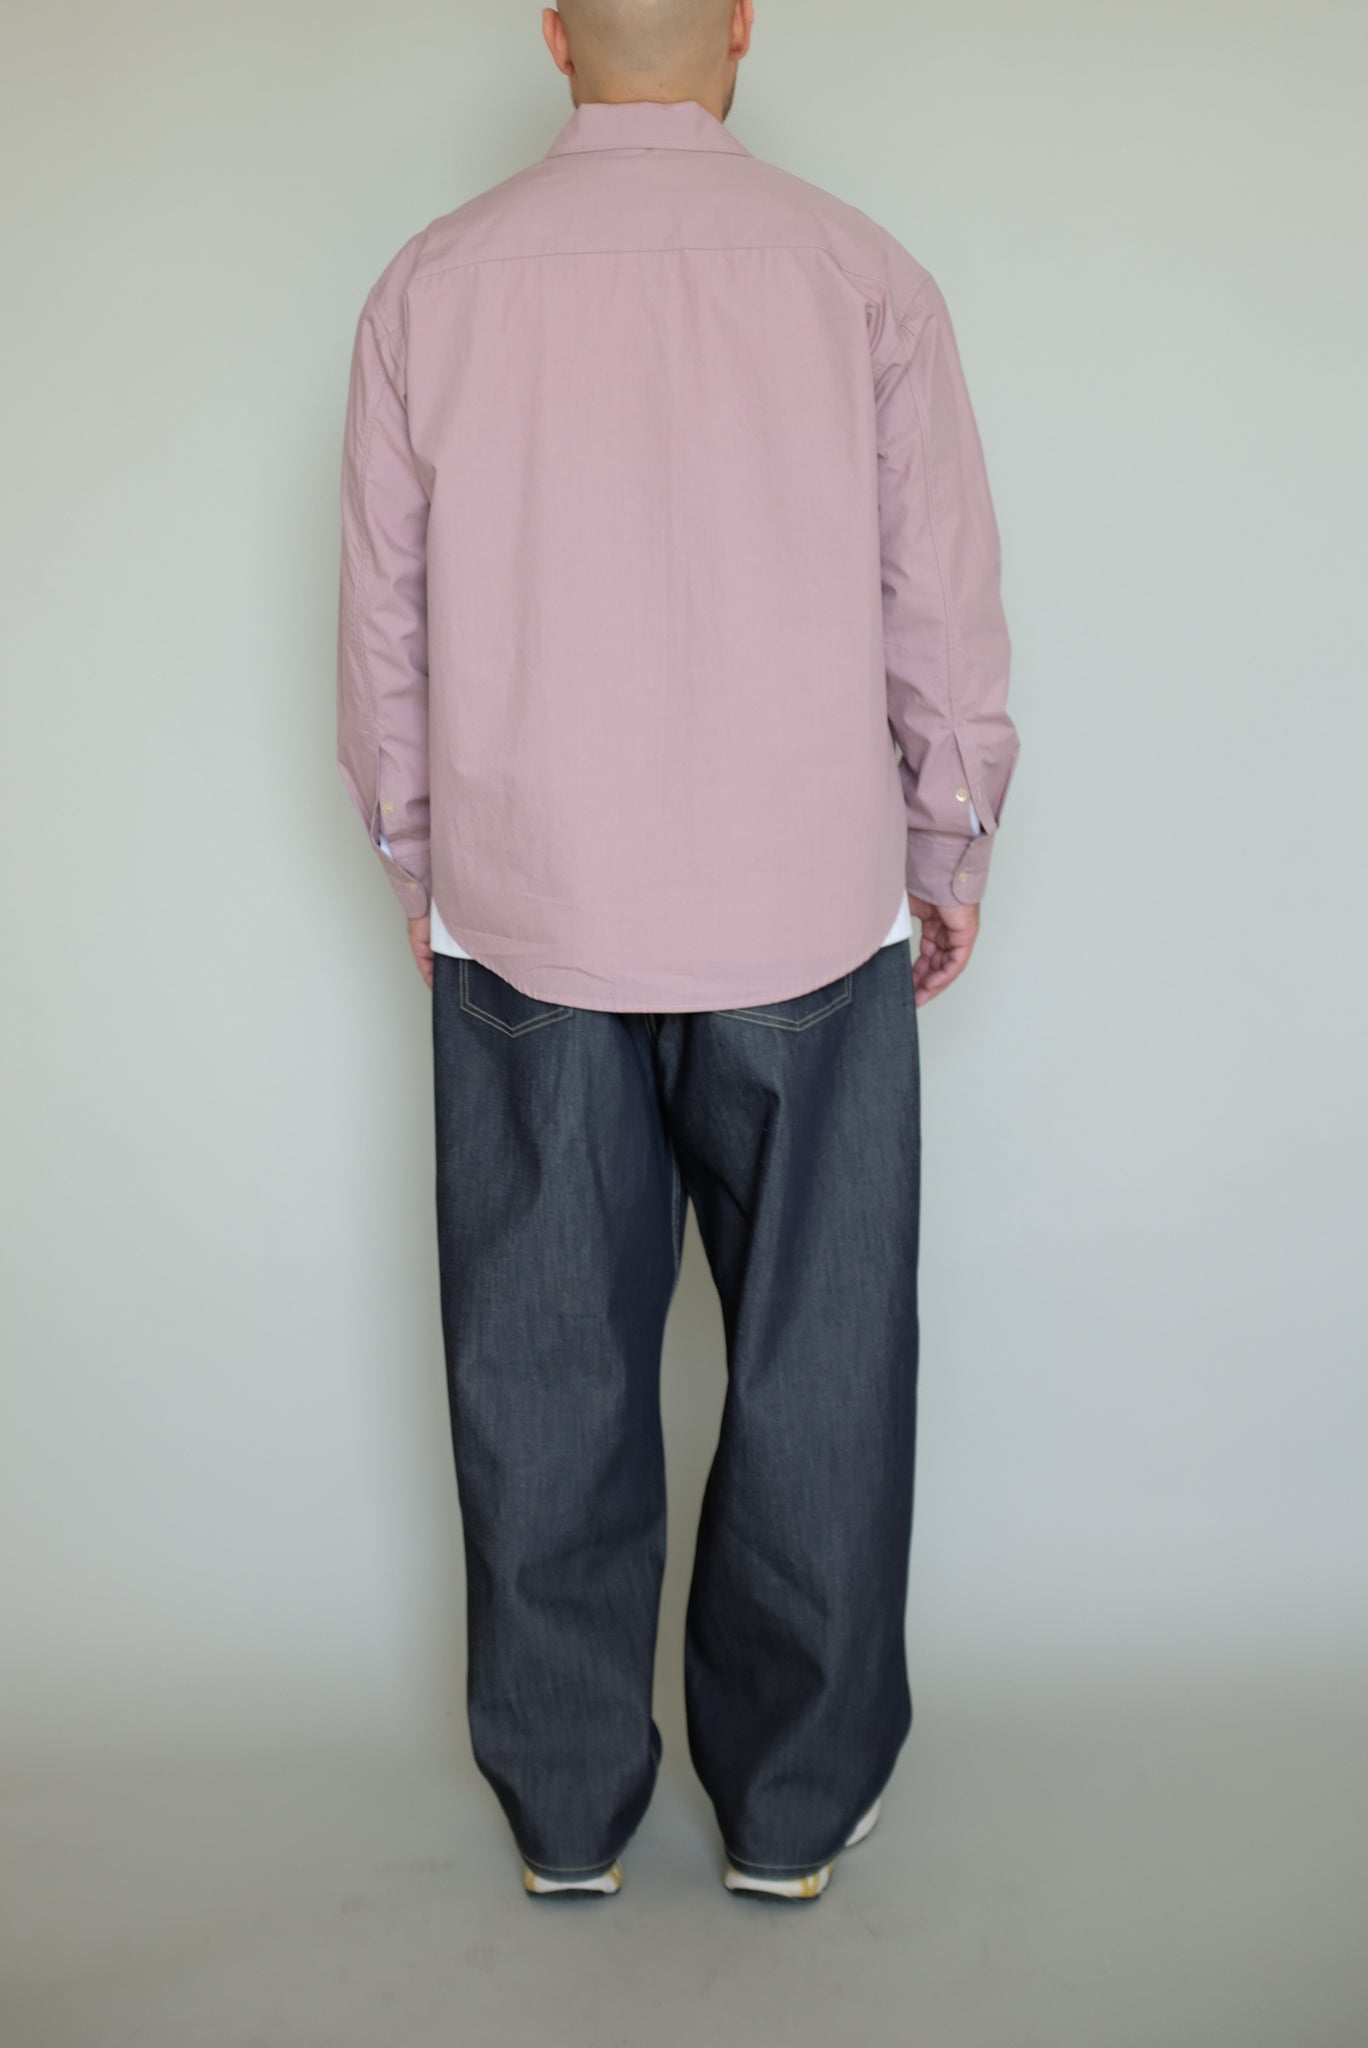 Taly Pocket Shirt in Indy Pink